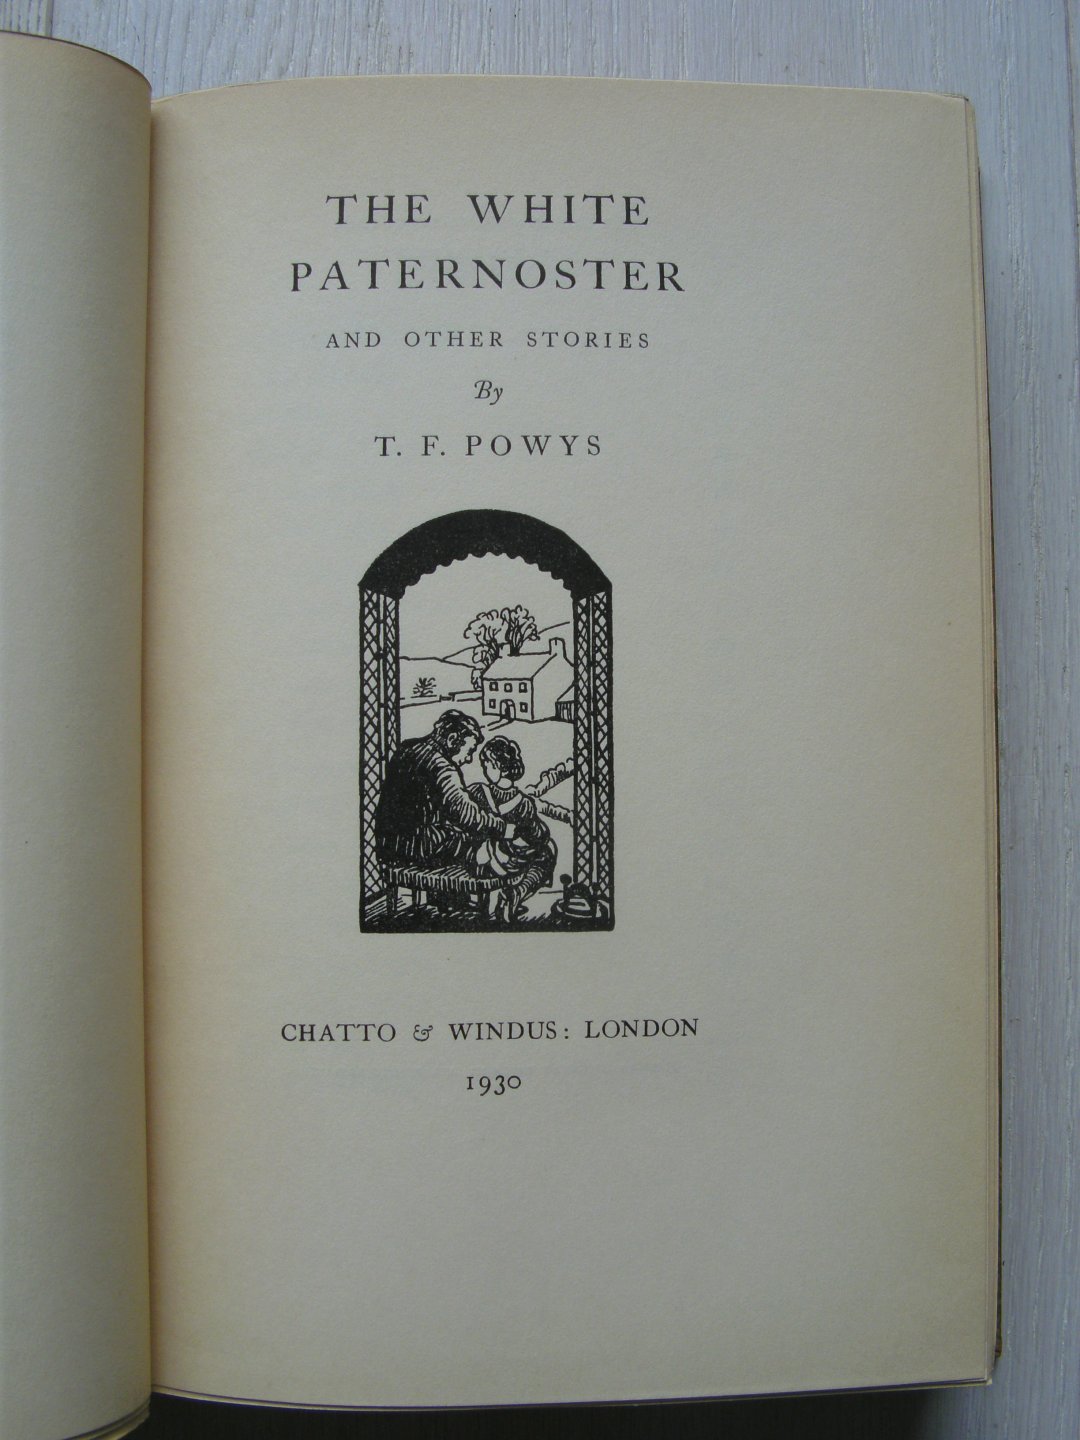 Powys Theodore Francis - The white paternoster and other stories (Photo's)